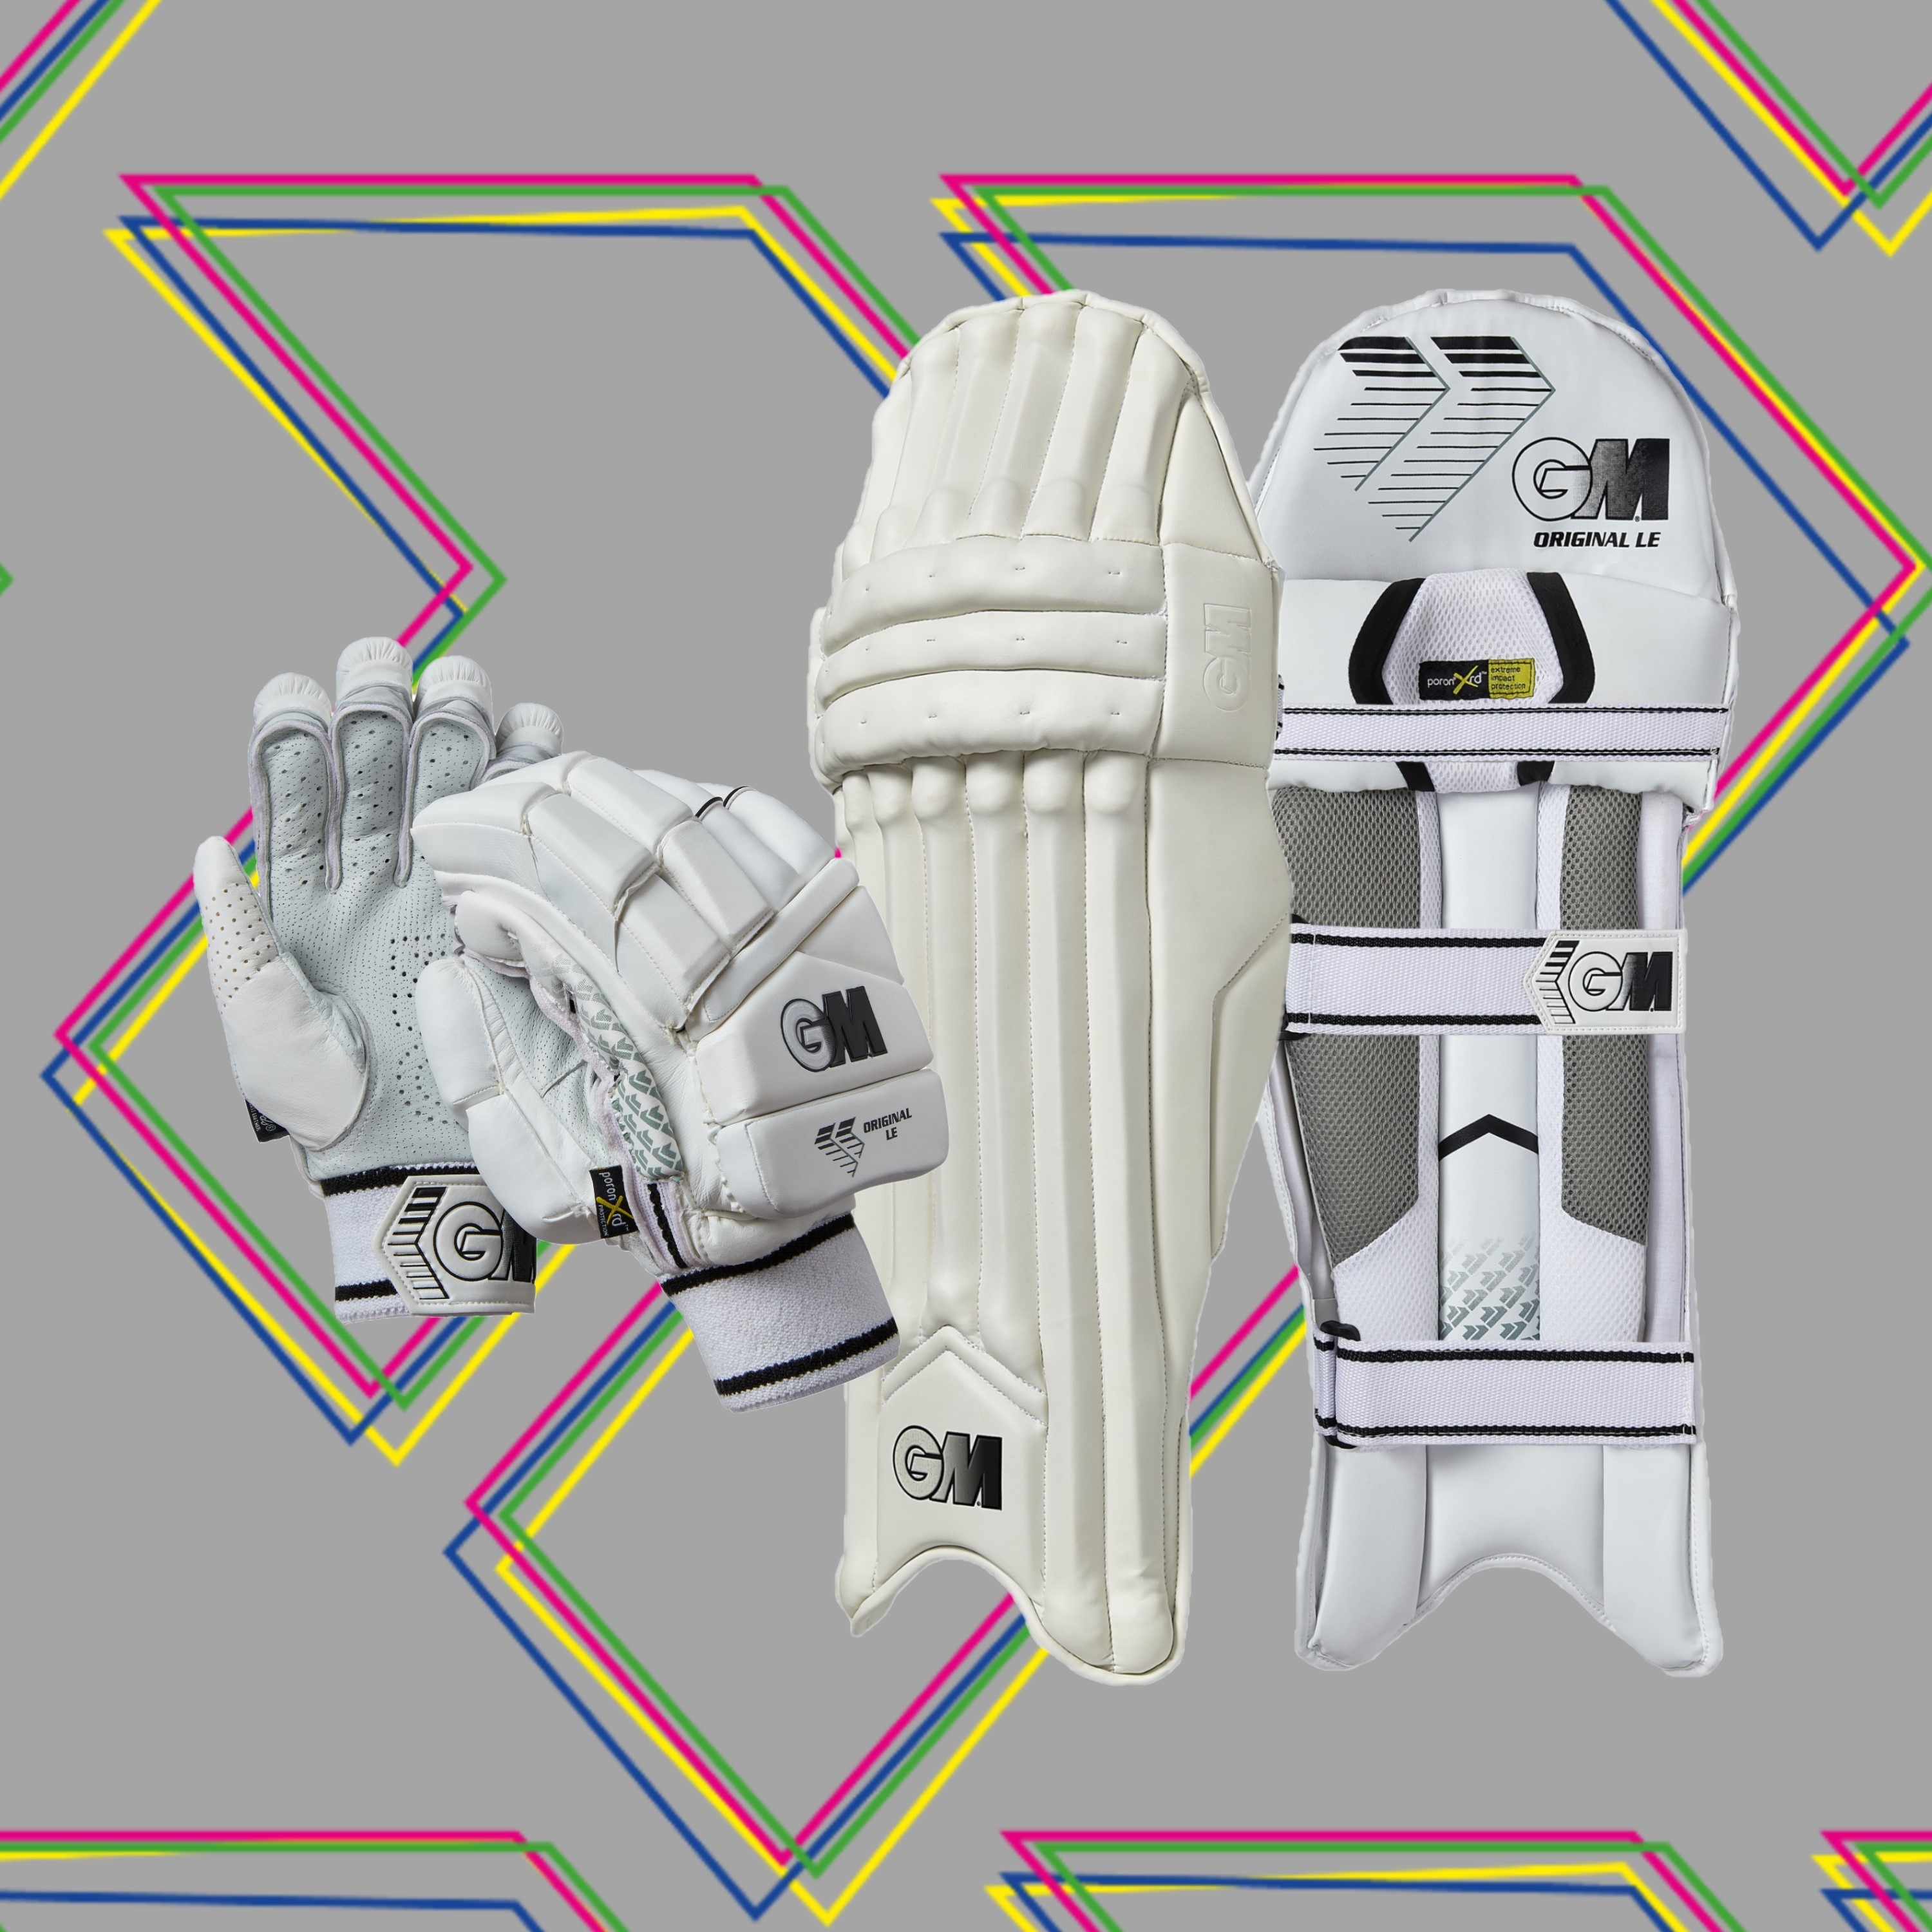 Cricket products